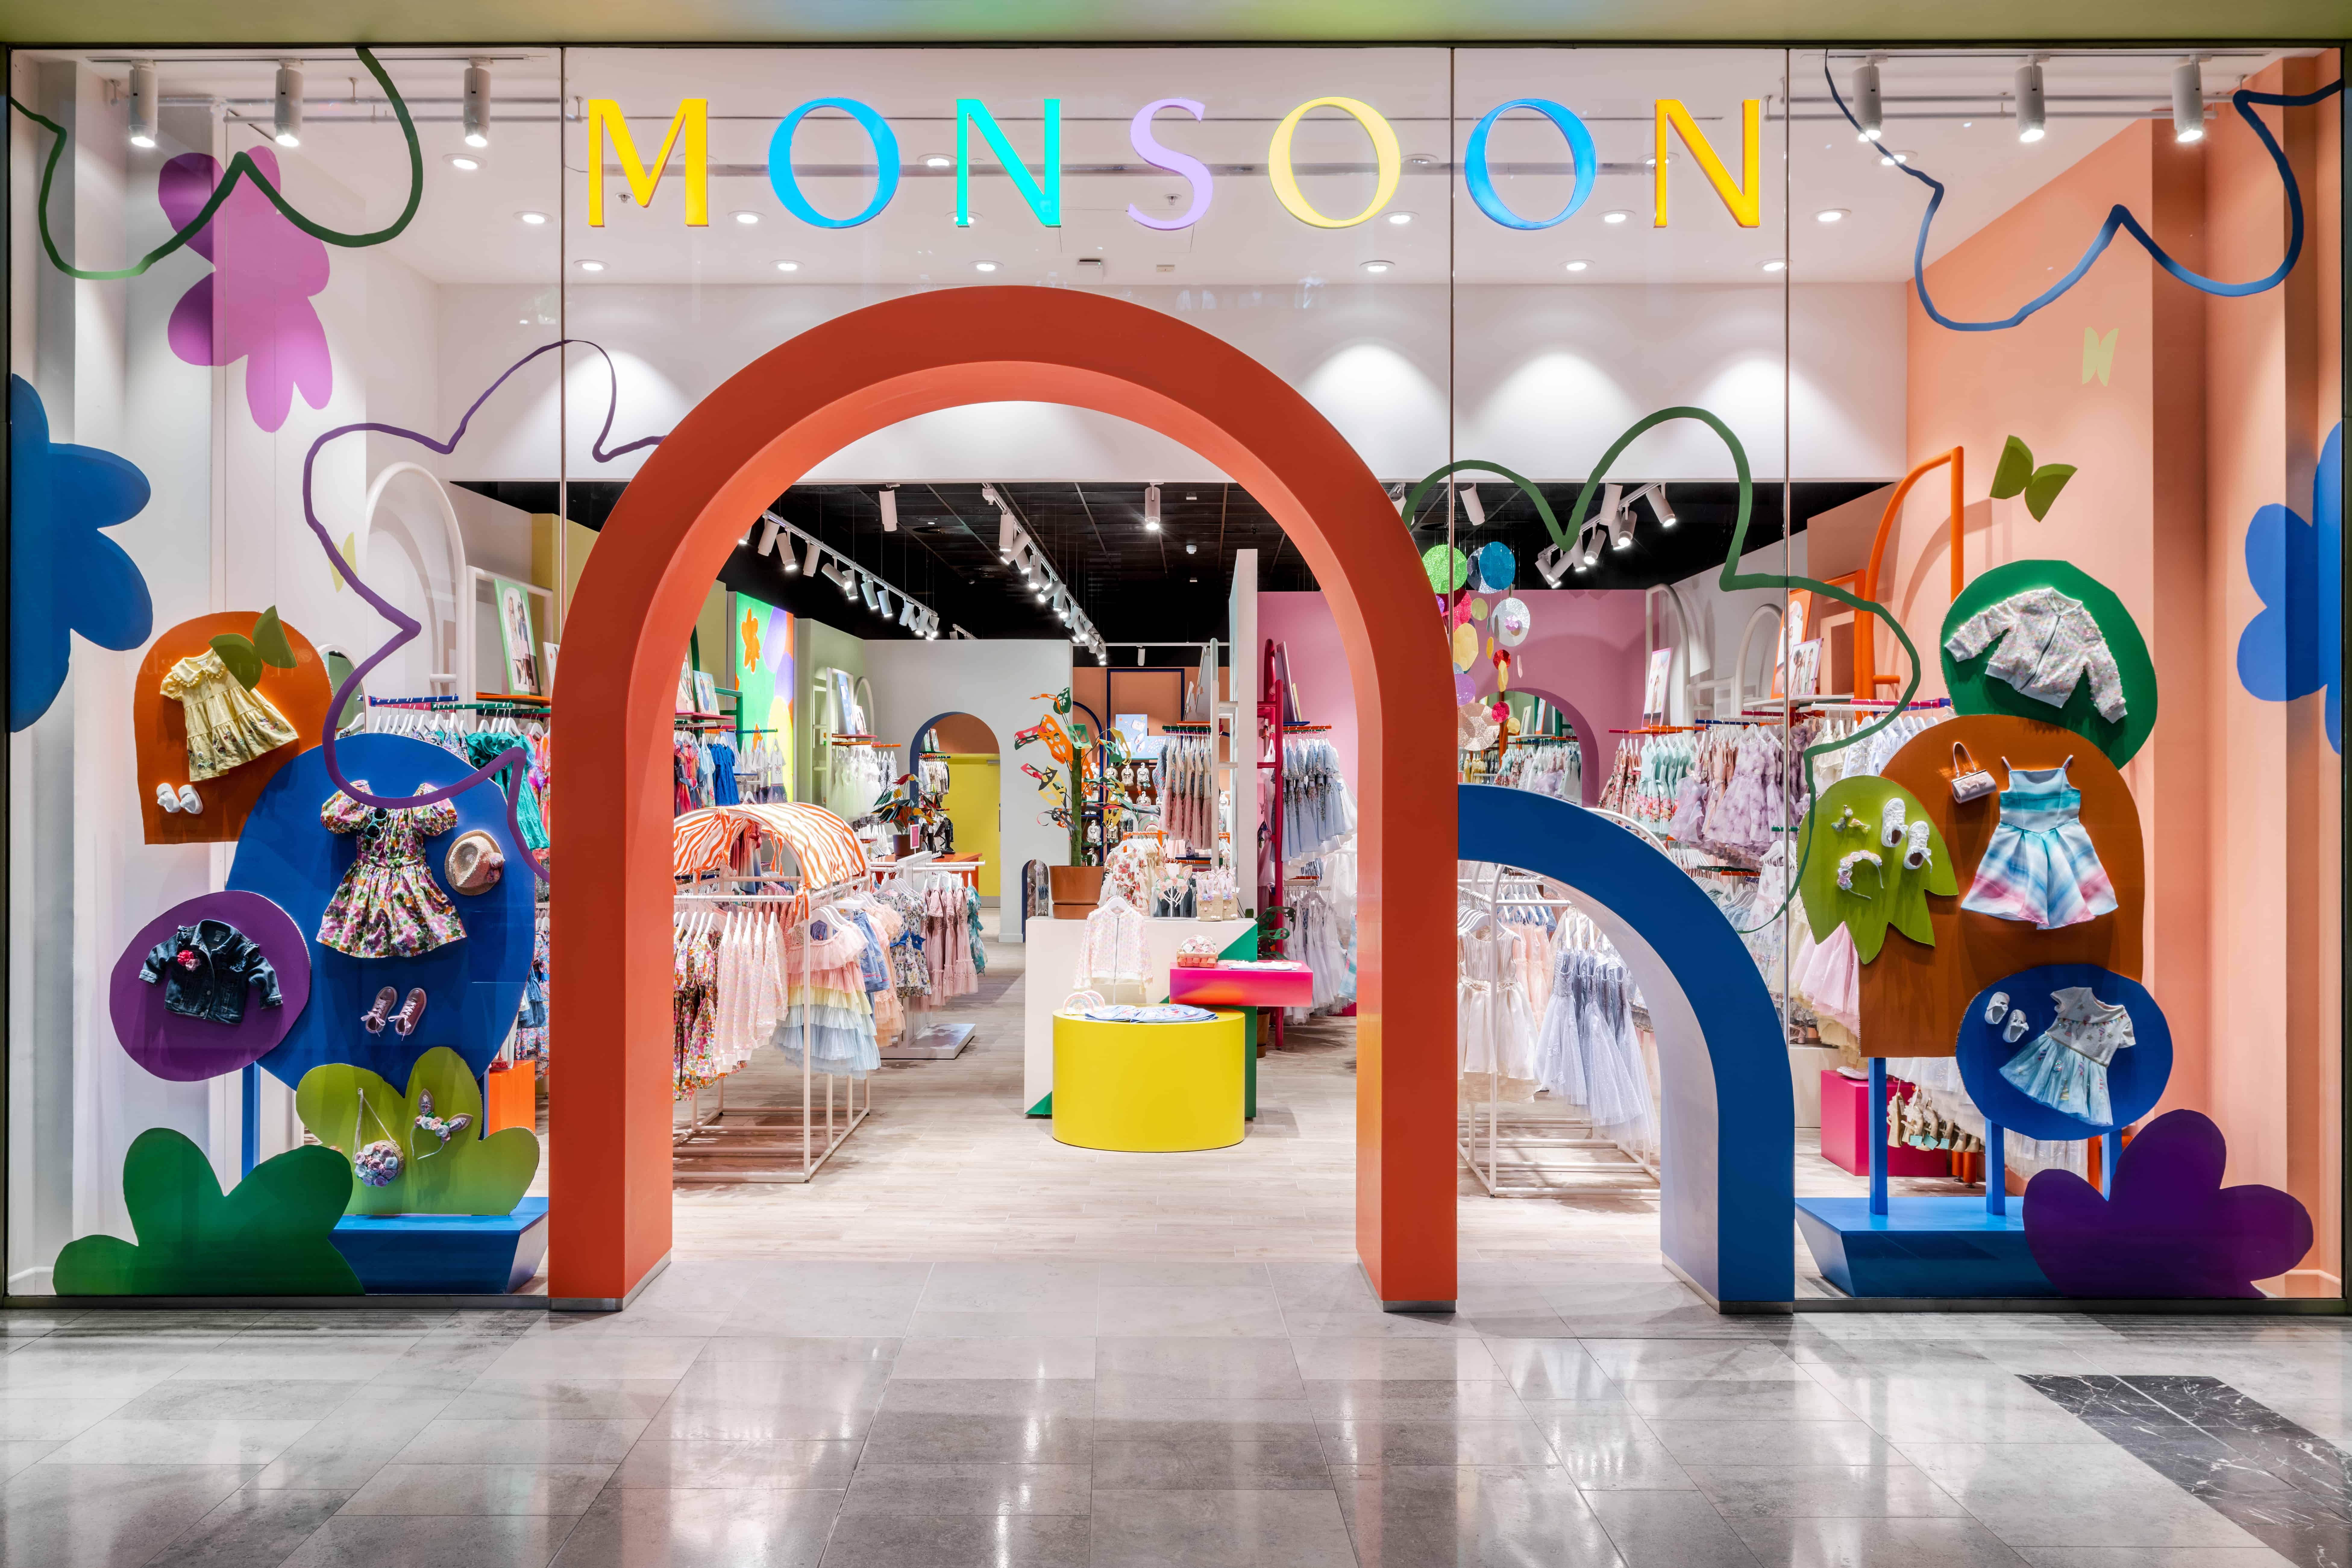 The Monsoon Children store offers adults and children their own sized entrance. Image courtesy of Monsoon